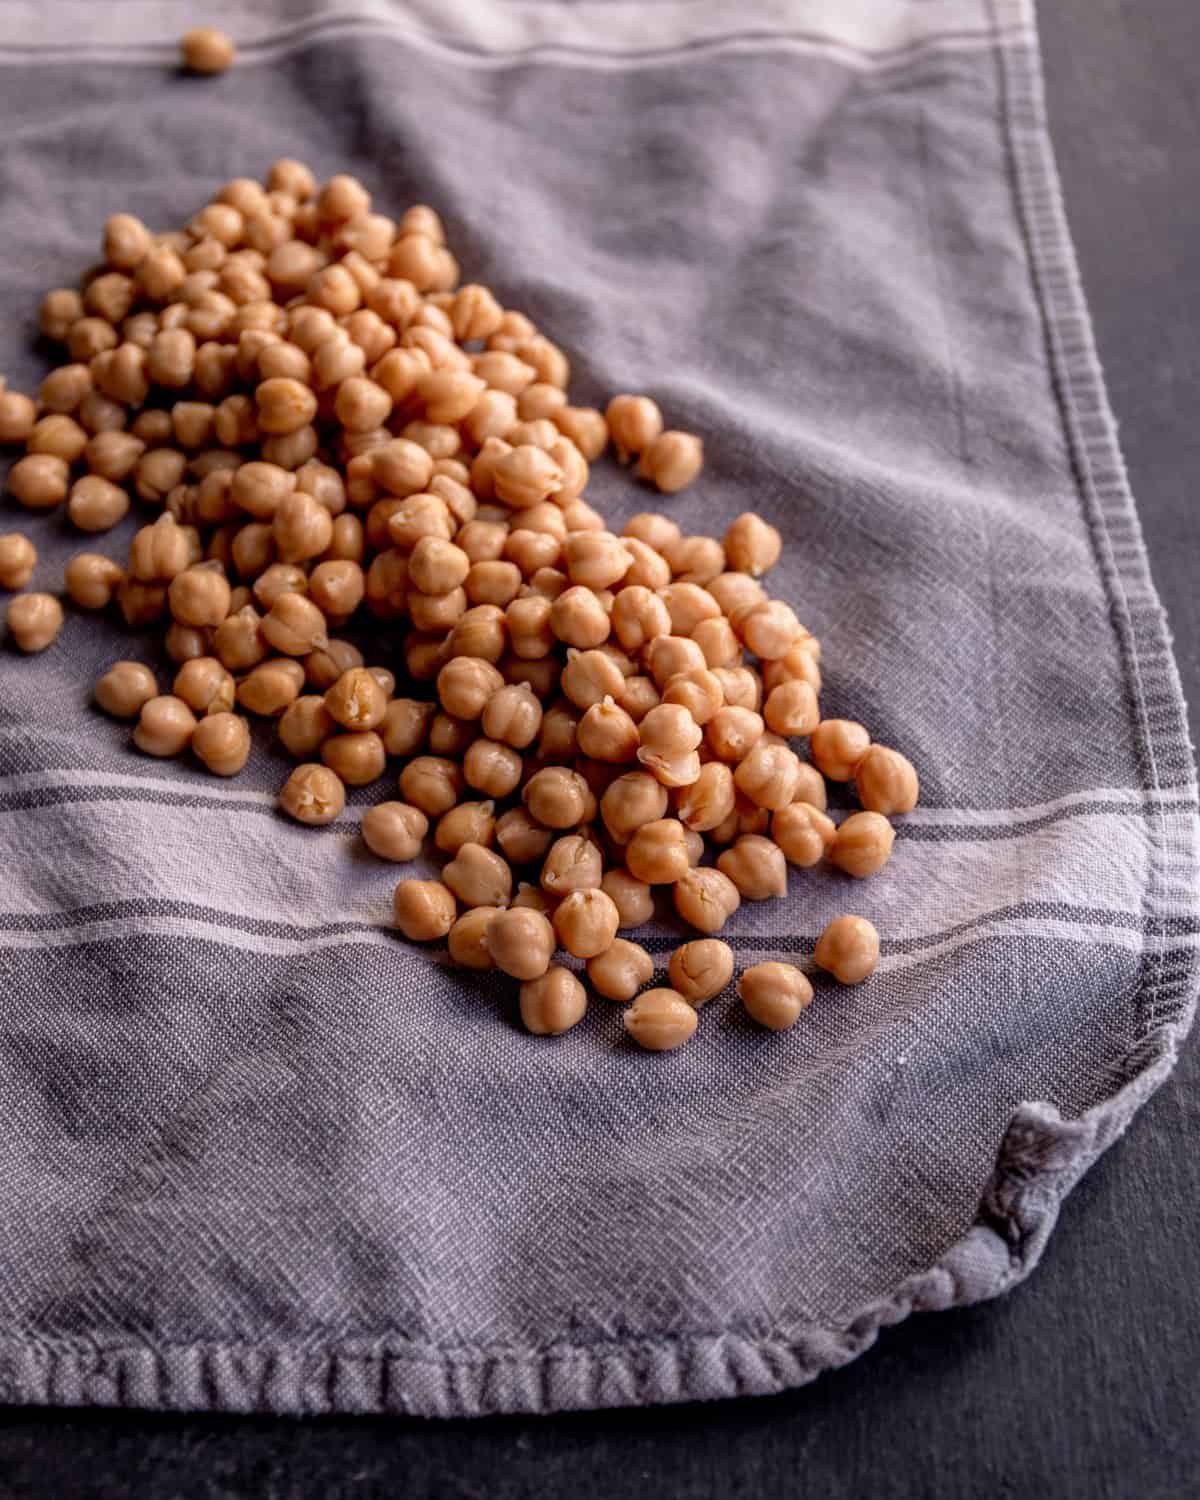 uncooked chickpeas on a gray dishtowel